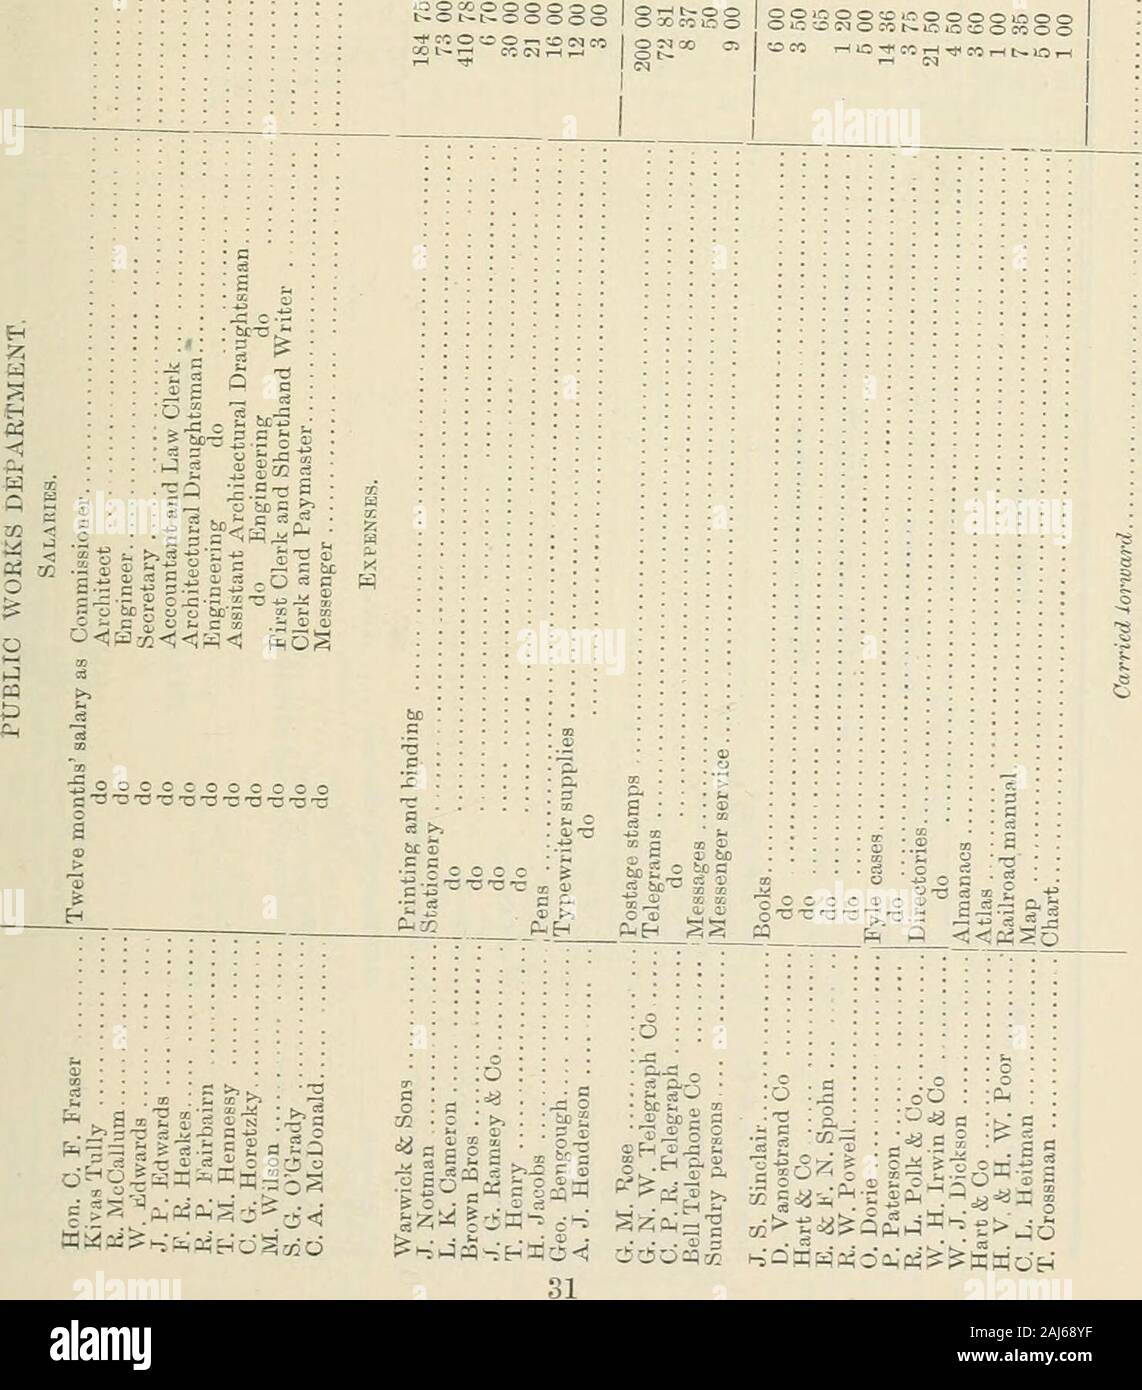 Ontario Sessional Papers, 1891, No.19-33 . 54 Victoria, Sessional Papers (No. 19). A. 1891 &gt;oo o K oo I oo(Mt*csCO ! iaCOooo 0:0 I CC rH C5 tM t^ i-t loCCt^tnCC ?0 0« li-iOC=rtO St B ??; H 3 s v-s H s « i:^ &lt;; 1 cu H S Q Q 25 w &lt; Hi •^ ^ 0 oi 0 so J= o o c t..S 1^ at* »- «! S Sf-SsT X O O .;: ^ fl u X (C^ « X a* — w Cw, ?&lt;S&lt;ft £ a OQ c E-1 ^ 2 a :- Z^&gt; = f-^ .? ?C o : = =-2 - ? C!J c ? c - —-&gt; a &gt;?,• 30 3 E S = o o 54 Victoria. Sessional Papers (No. 19). A. 1891 ooooooooooocPOo5c 2E =r 5r *— — — *— i-P sOOOOOOOCX -» CQ (M r^r-^T-rr-r r-^ lOOXOOOOOO i&gt;.oi&gt;-t-.ooooo Stock Photo